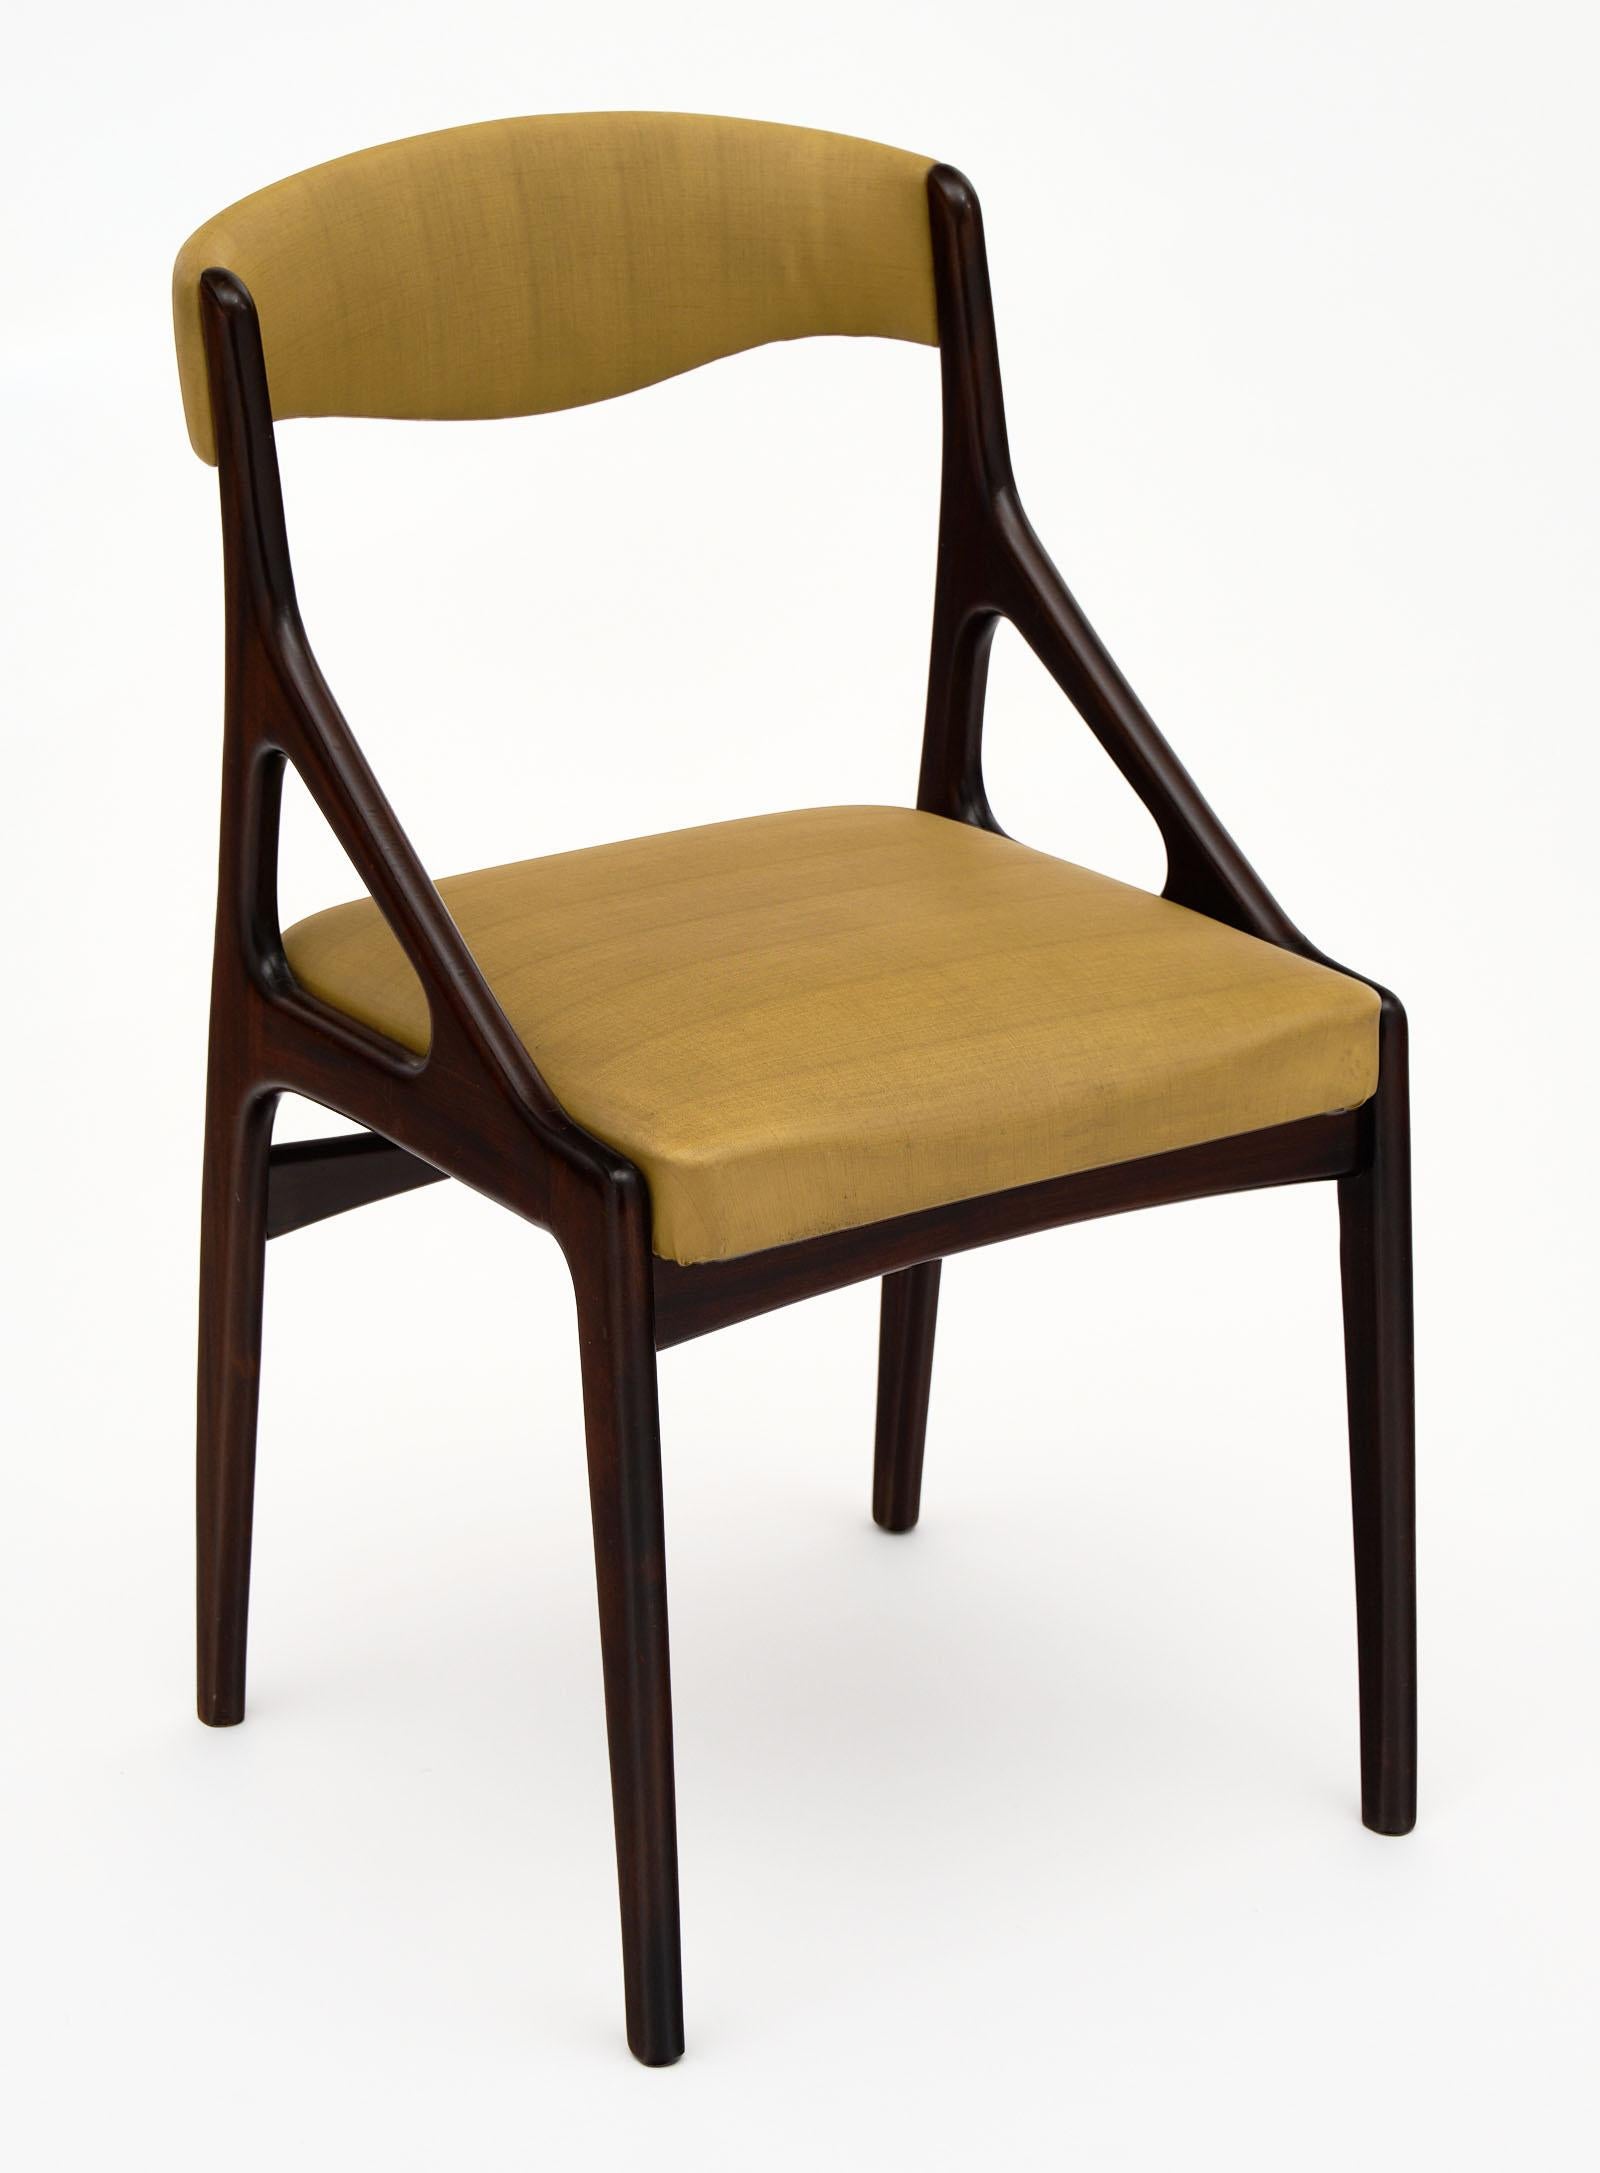 Midcentury Italian dining chairs in a modernist style. Each is made of mahogany finished with a lustrous French polish. The original green/gold vinyl upholstery is in good vintage condition with only minor surface wear consistent with age and use.